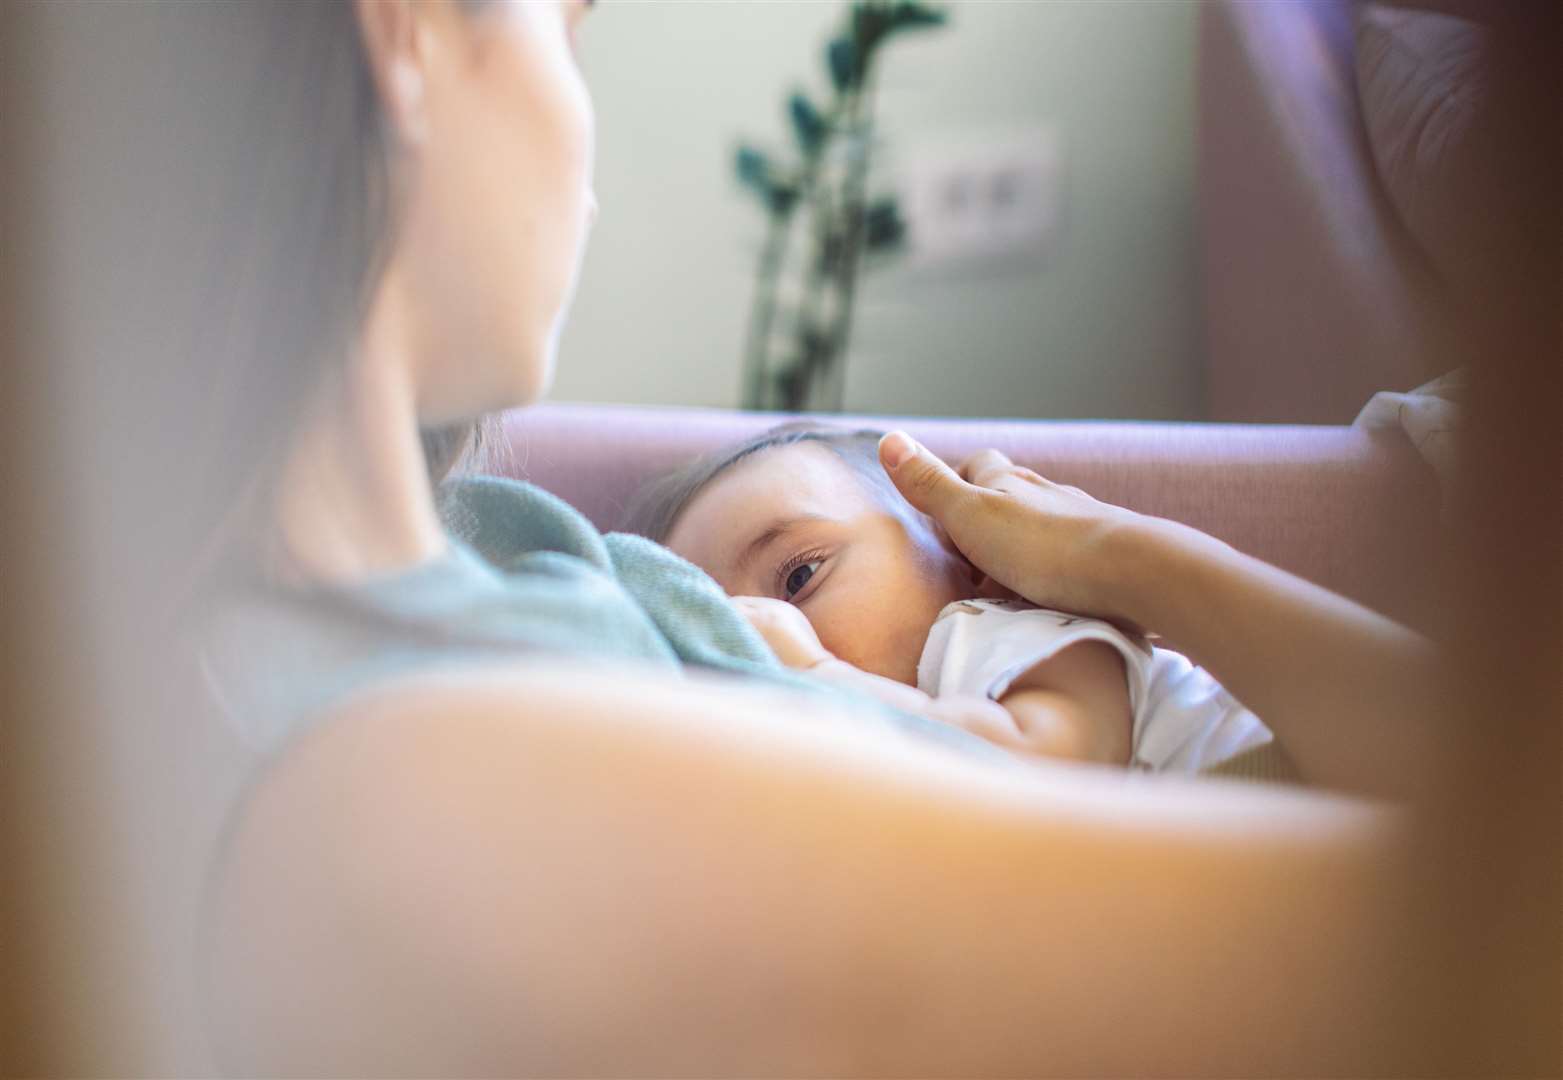 Not all mothers are able to breastfeed. Image: iStock.